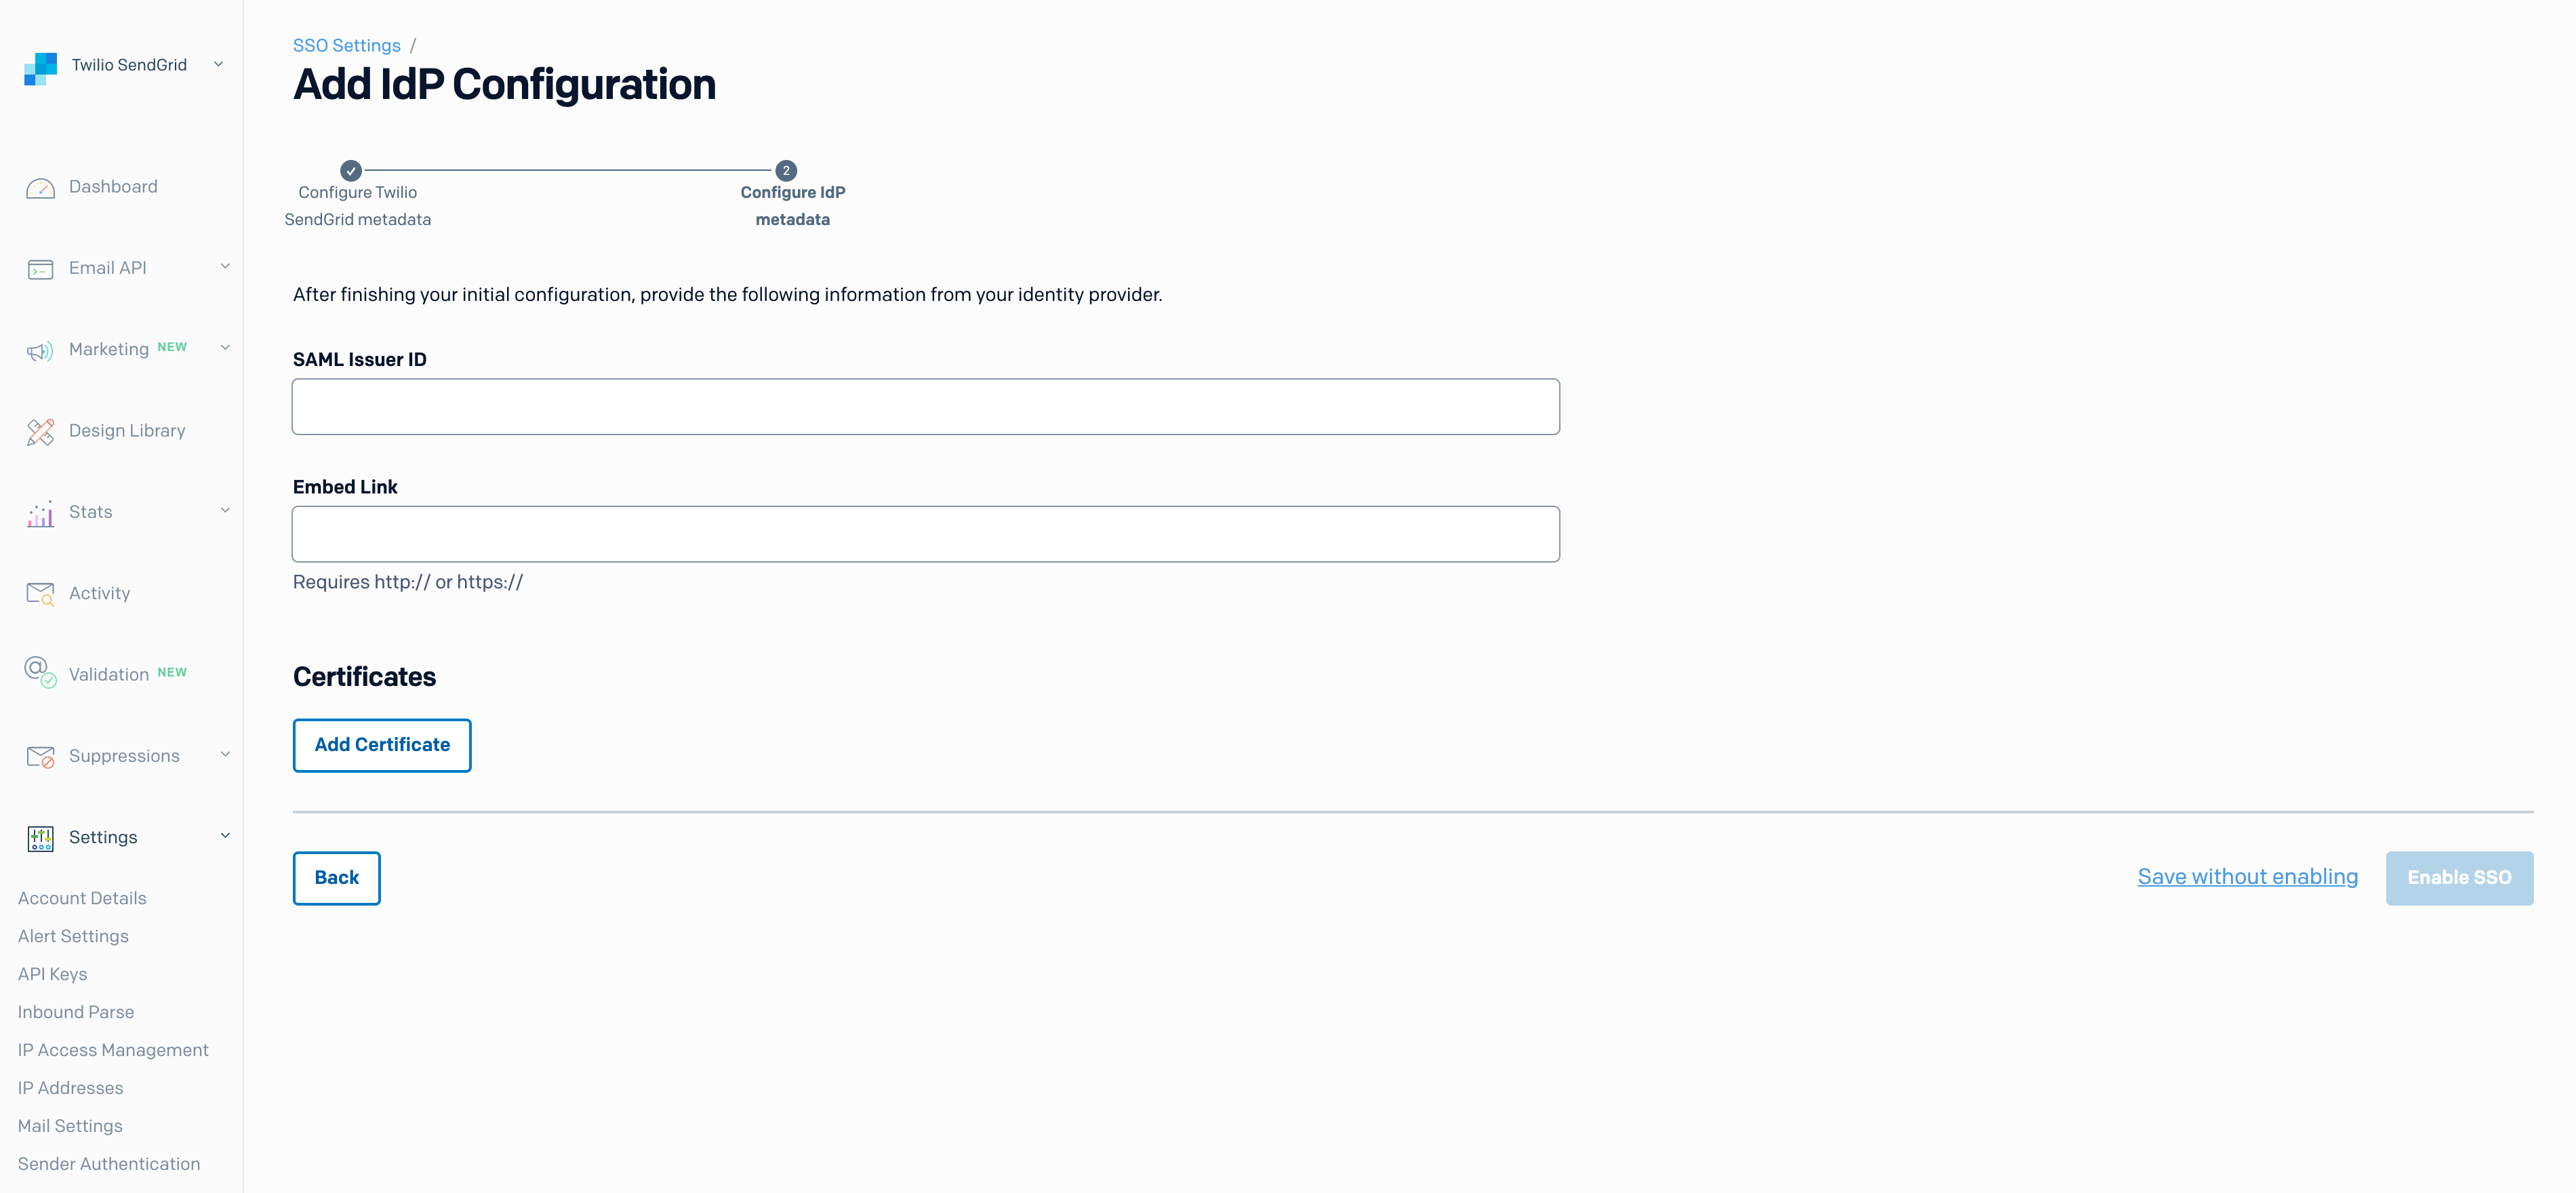 Add values from your IdP to the Twilio SendGrid configuration.